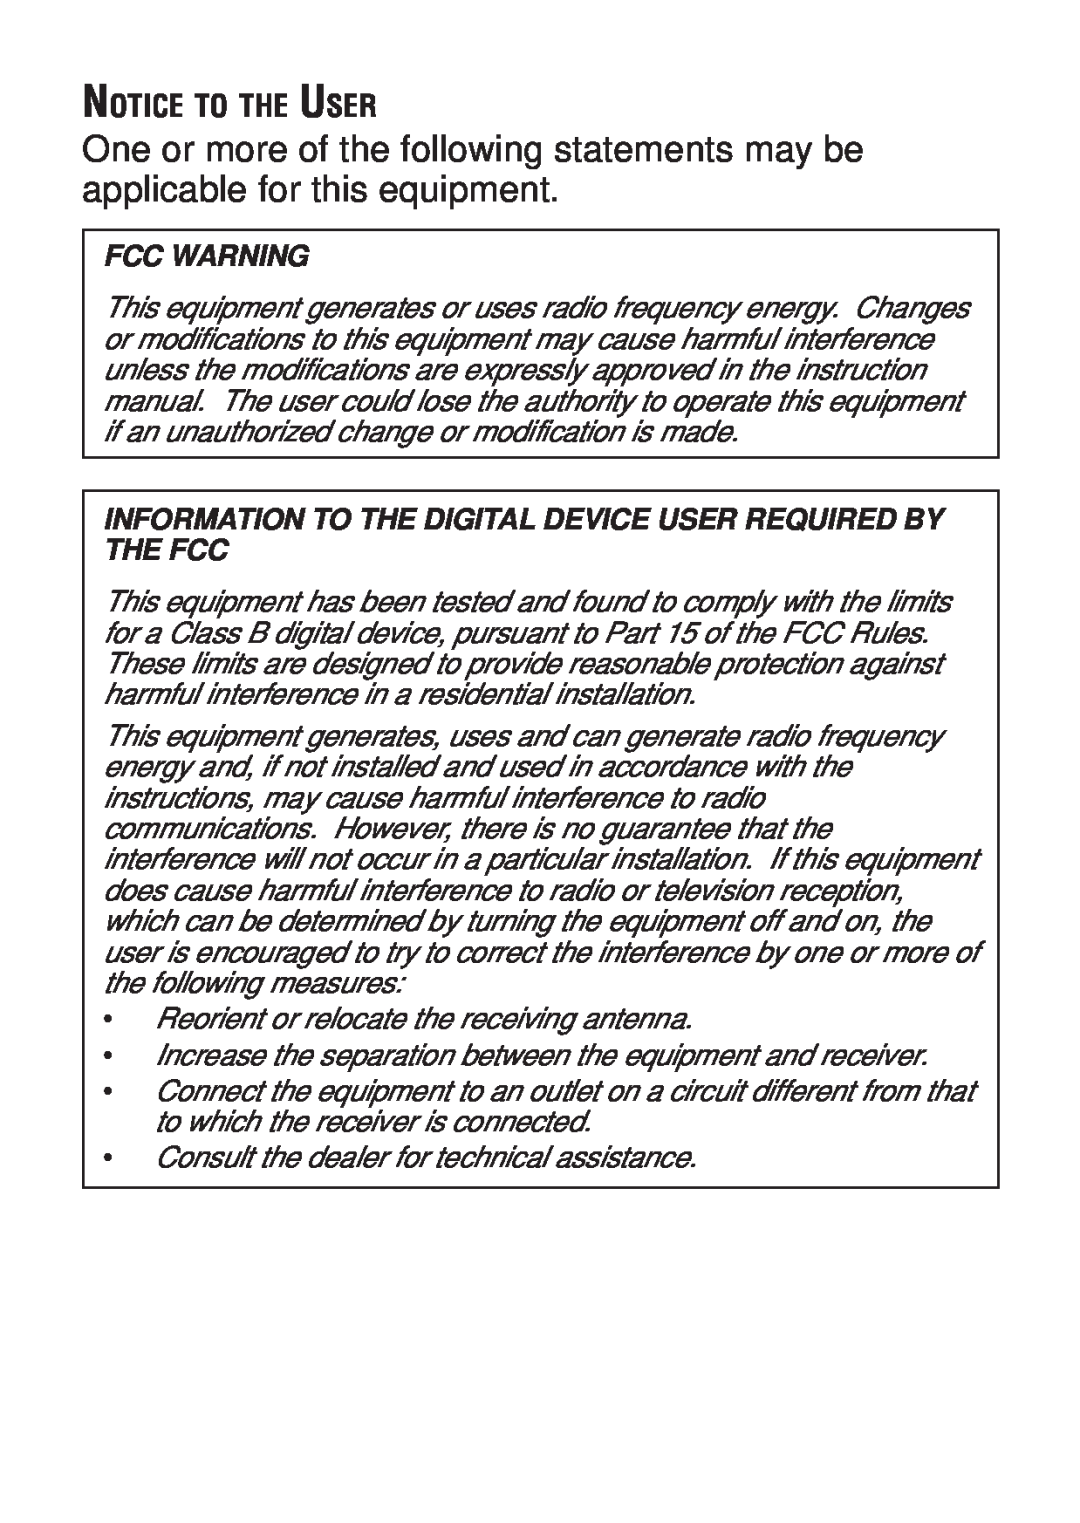 Kenwood TH-K2ET, TH-KAE, TH-K4AT, TH-K2AT instruction manual Notice To The User, Fcc Warning 